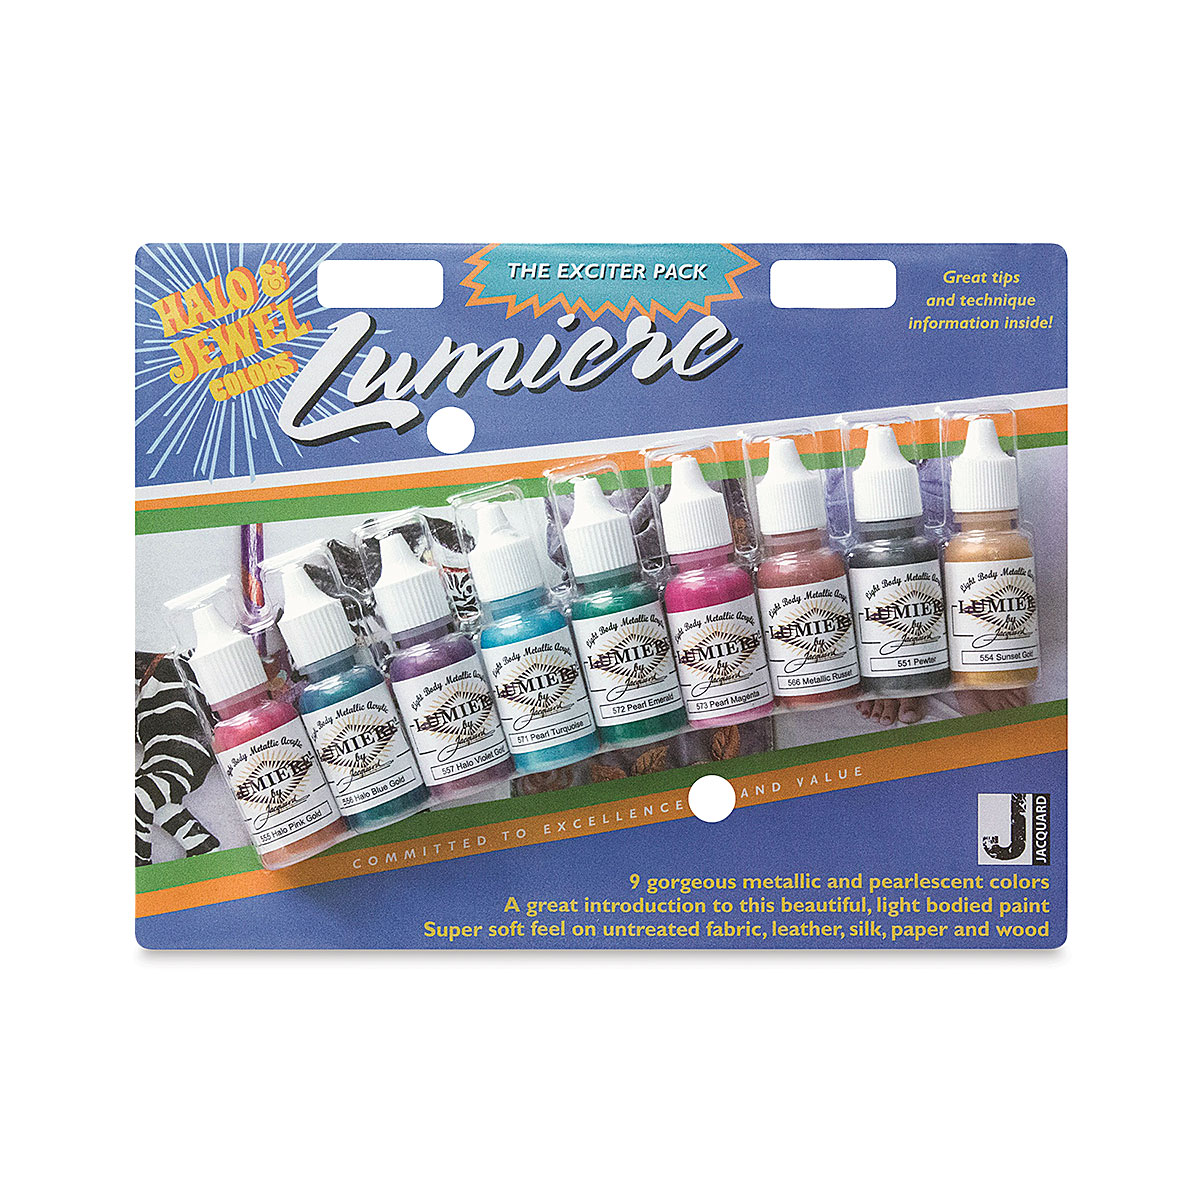 Lumiere - Metallic and pearlescent acrylic paint, brilliant shine. Flexible  on fabric, leather, vinyl or rubber